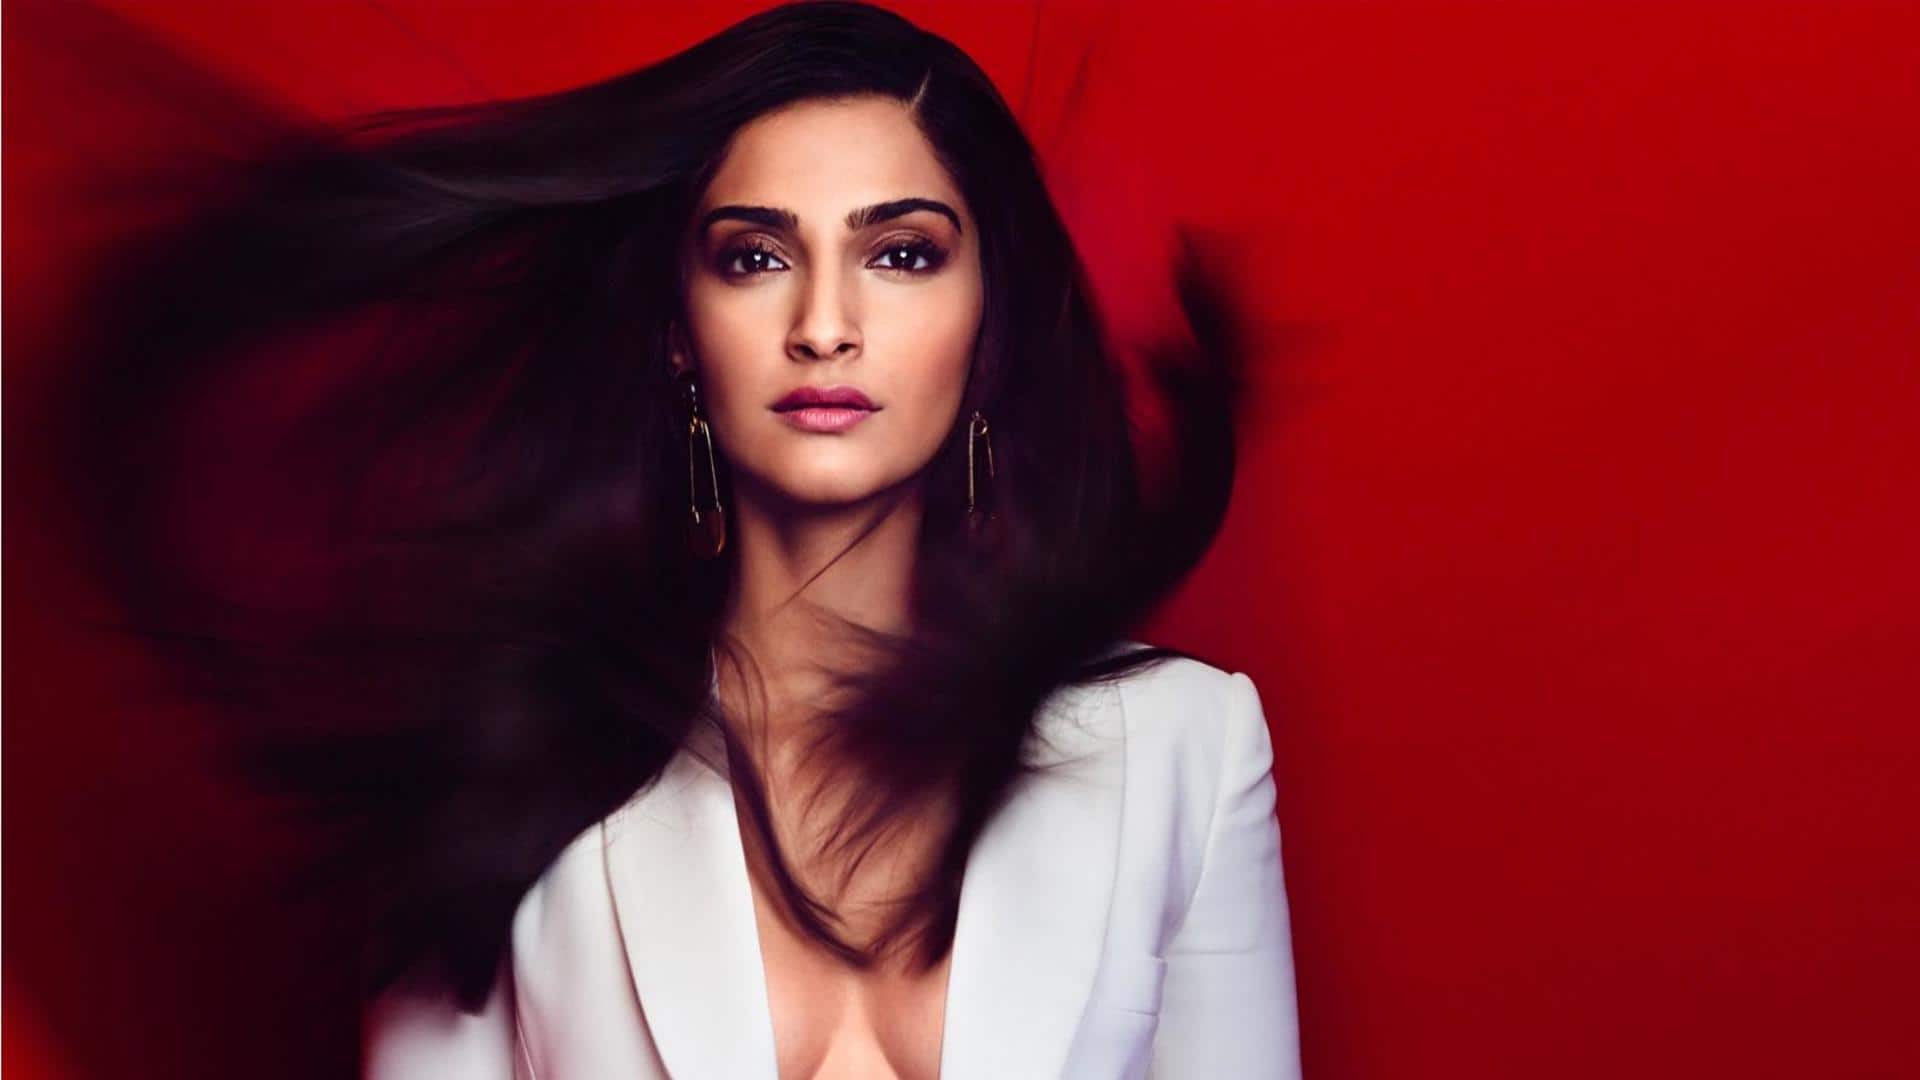 Sonam Kapoor's special coronation concert outfit created by 2 designers